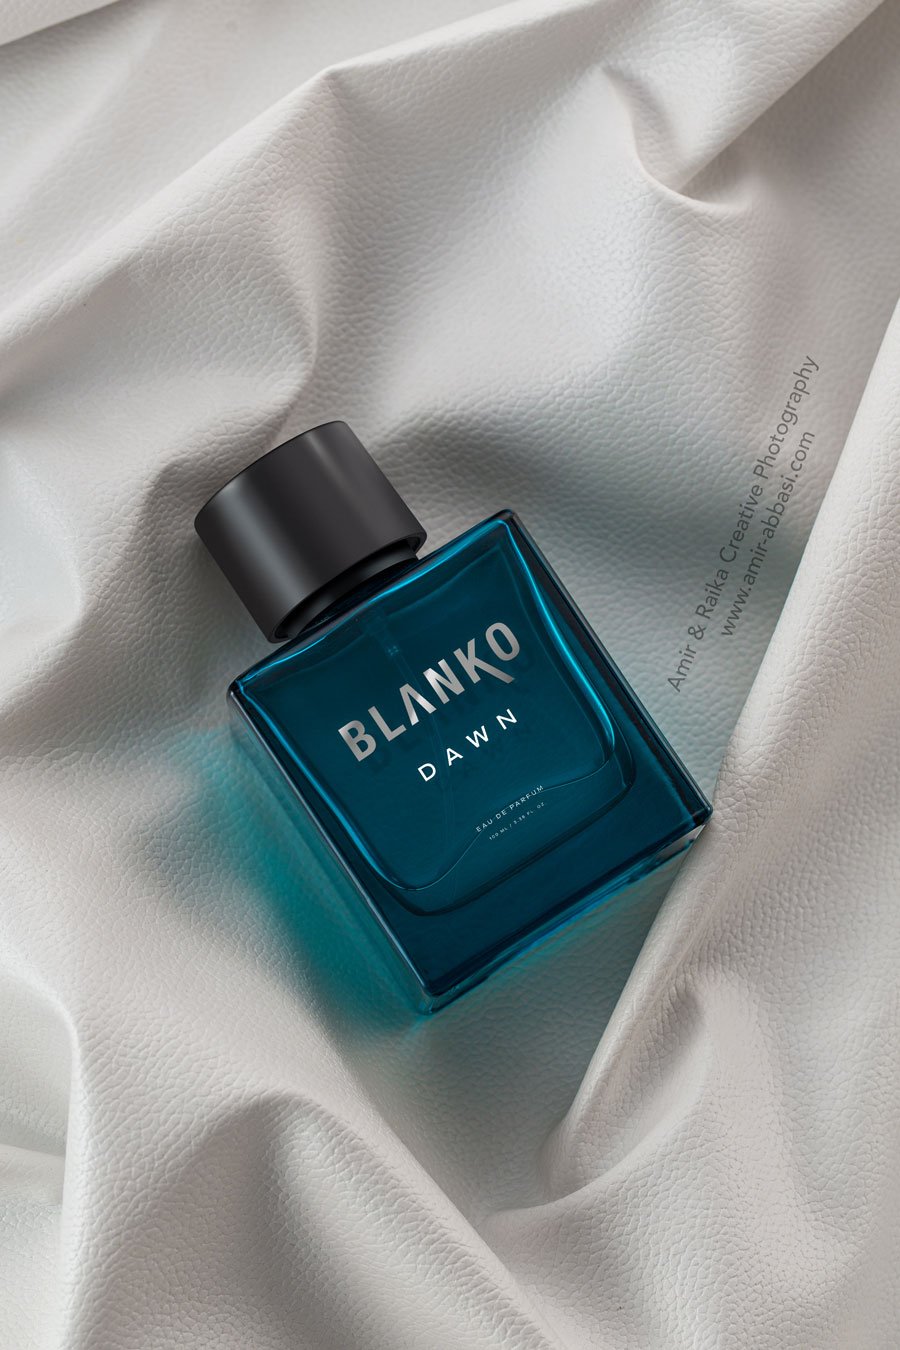 Amir & Raika Creative Photography brings to you the captivating scent of Blanko Perfume by King, captured in all its glory. 